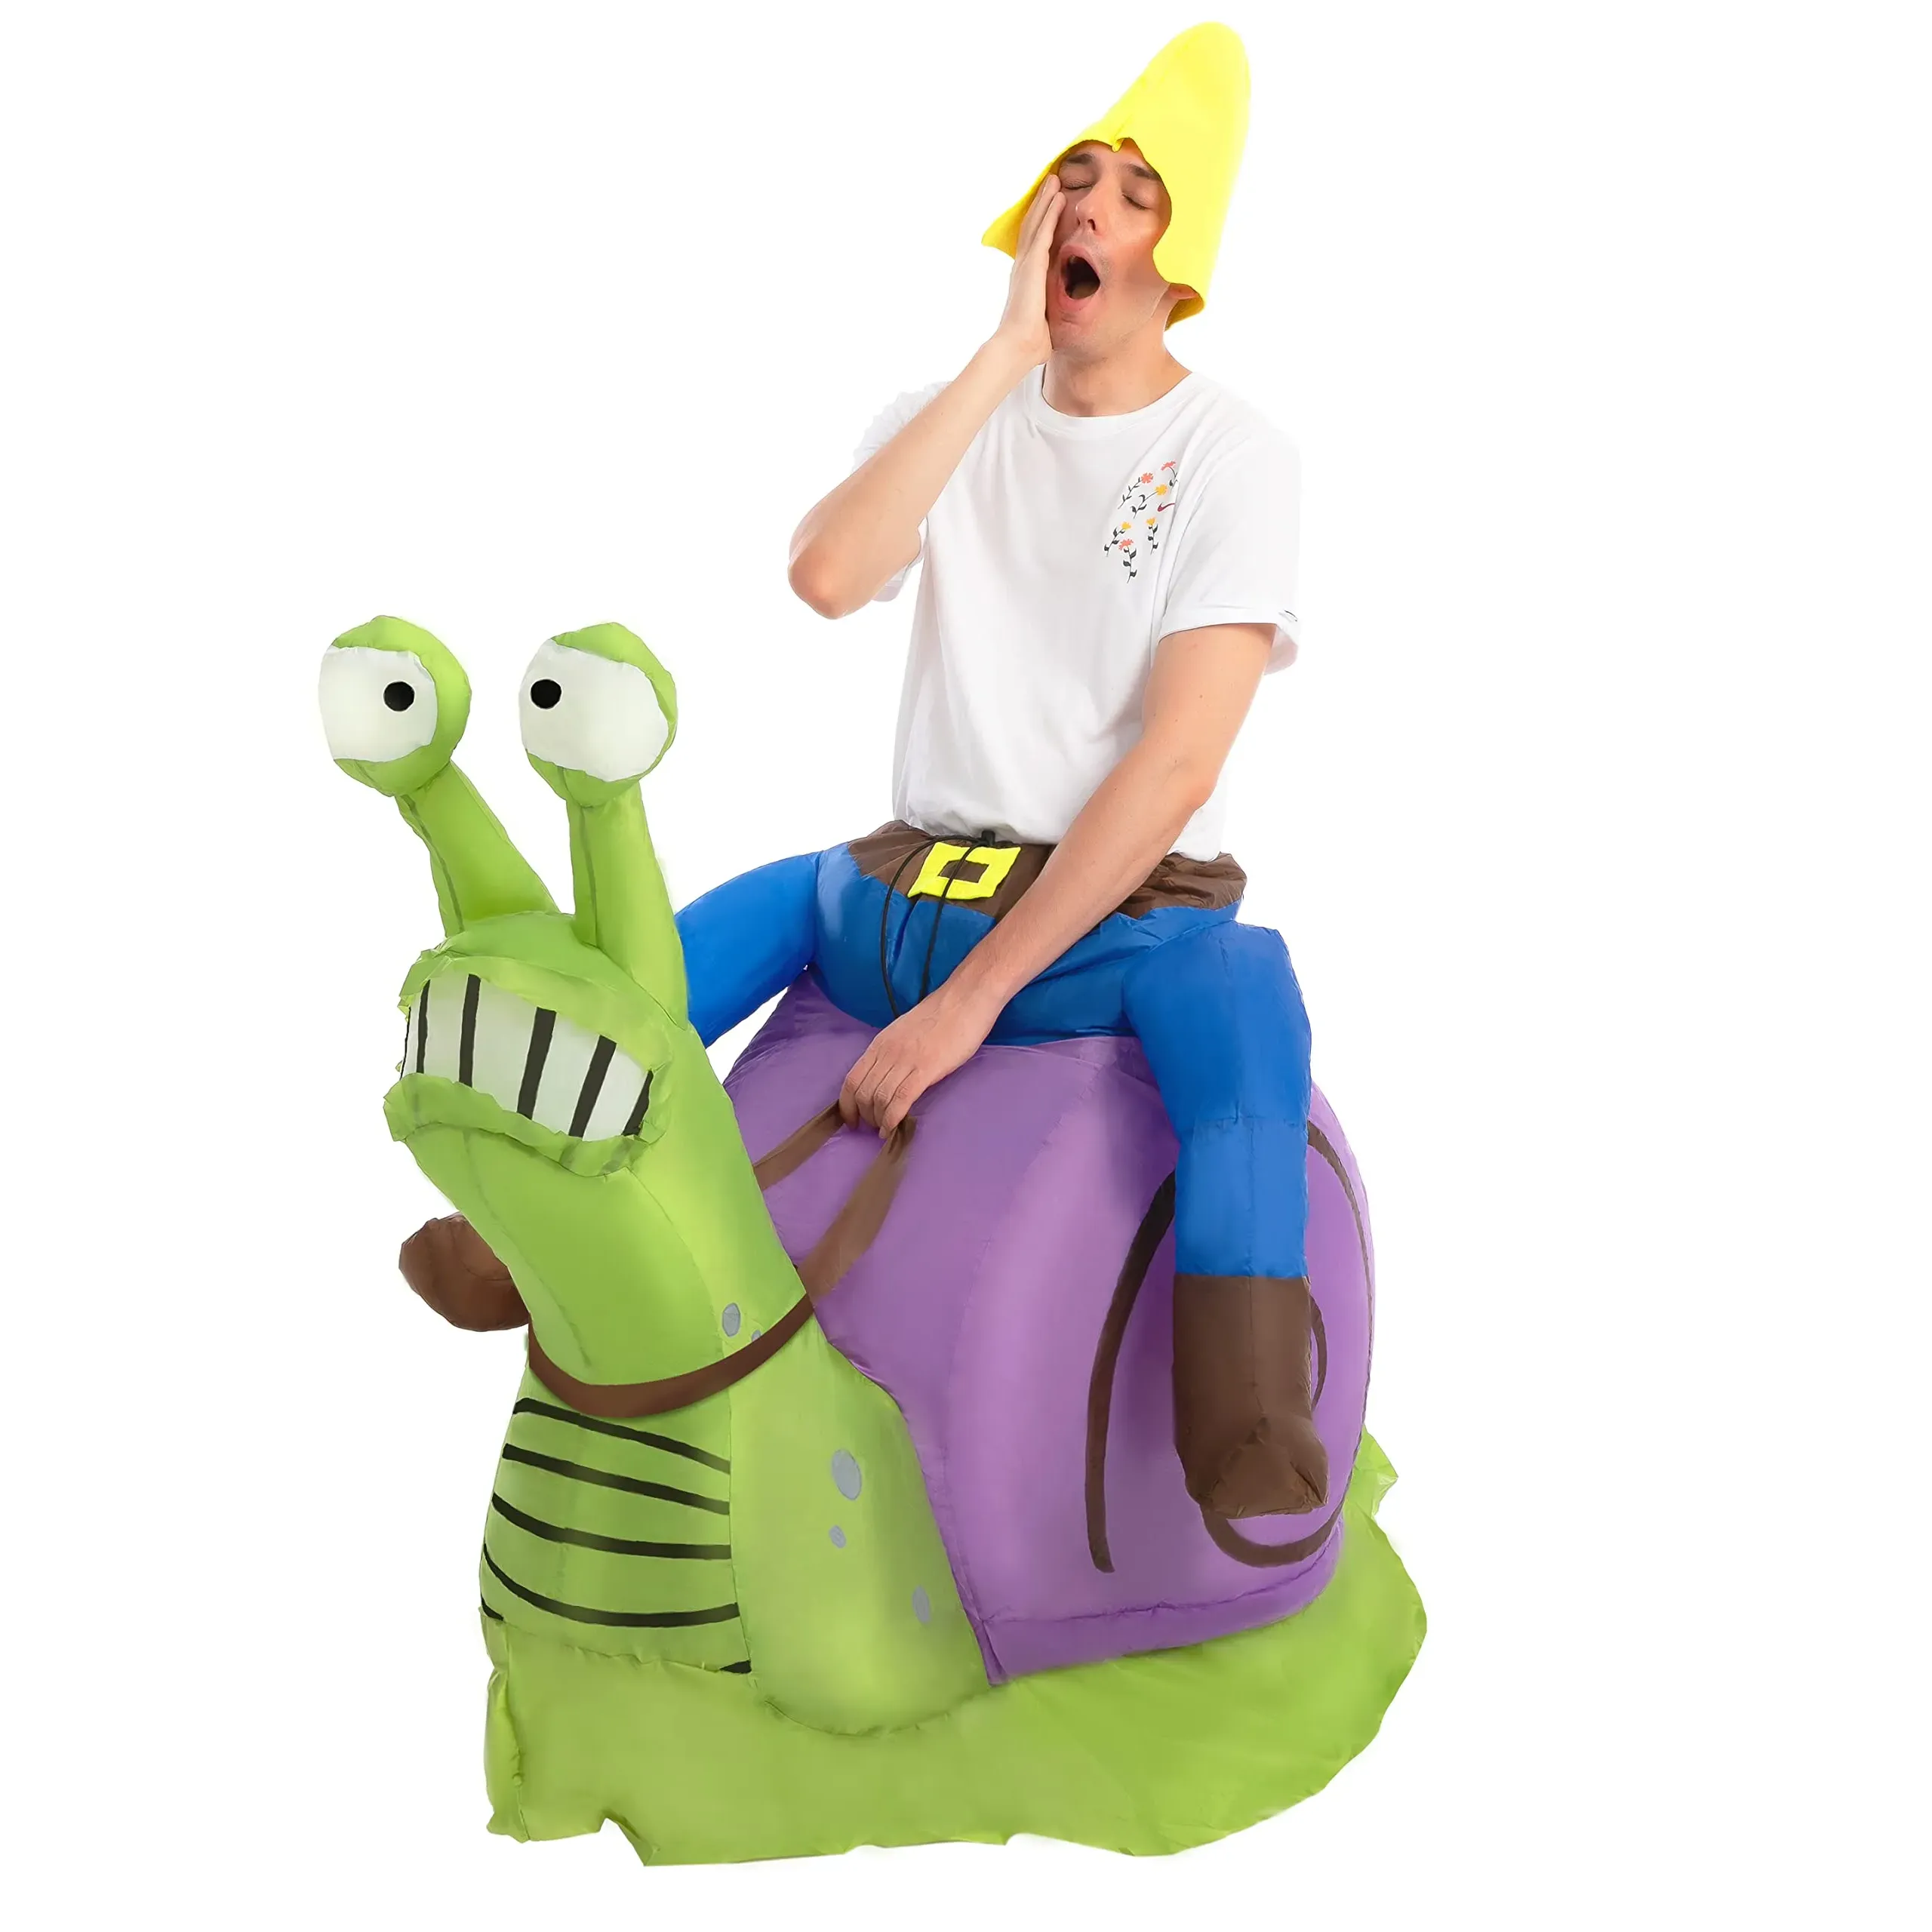 Adult riding snail blowup costumes